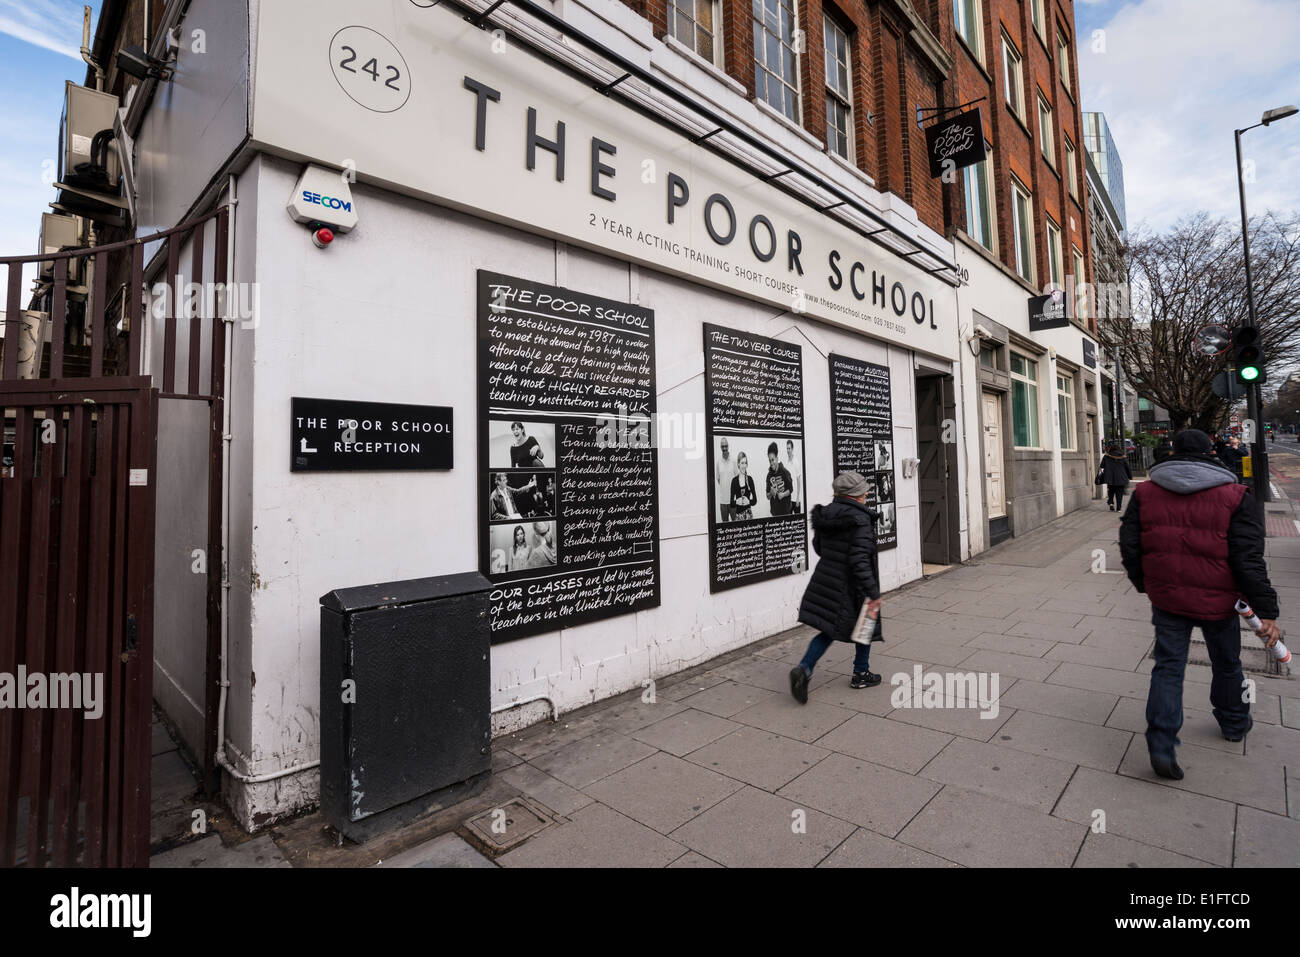 The Poor School is a drama school situated in King's Cross in London, UK Stock Photo